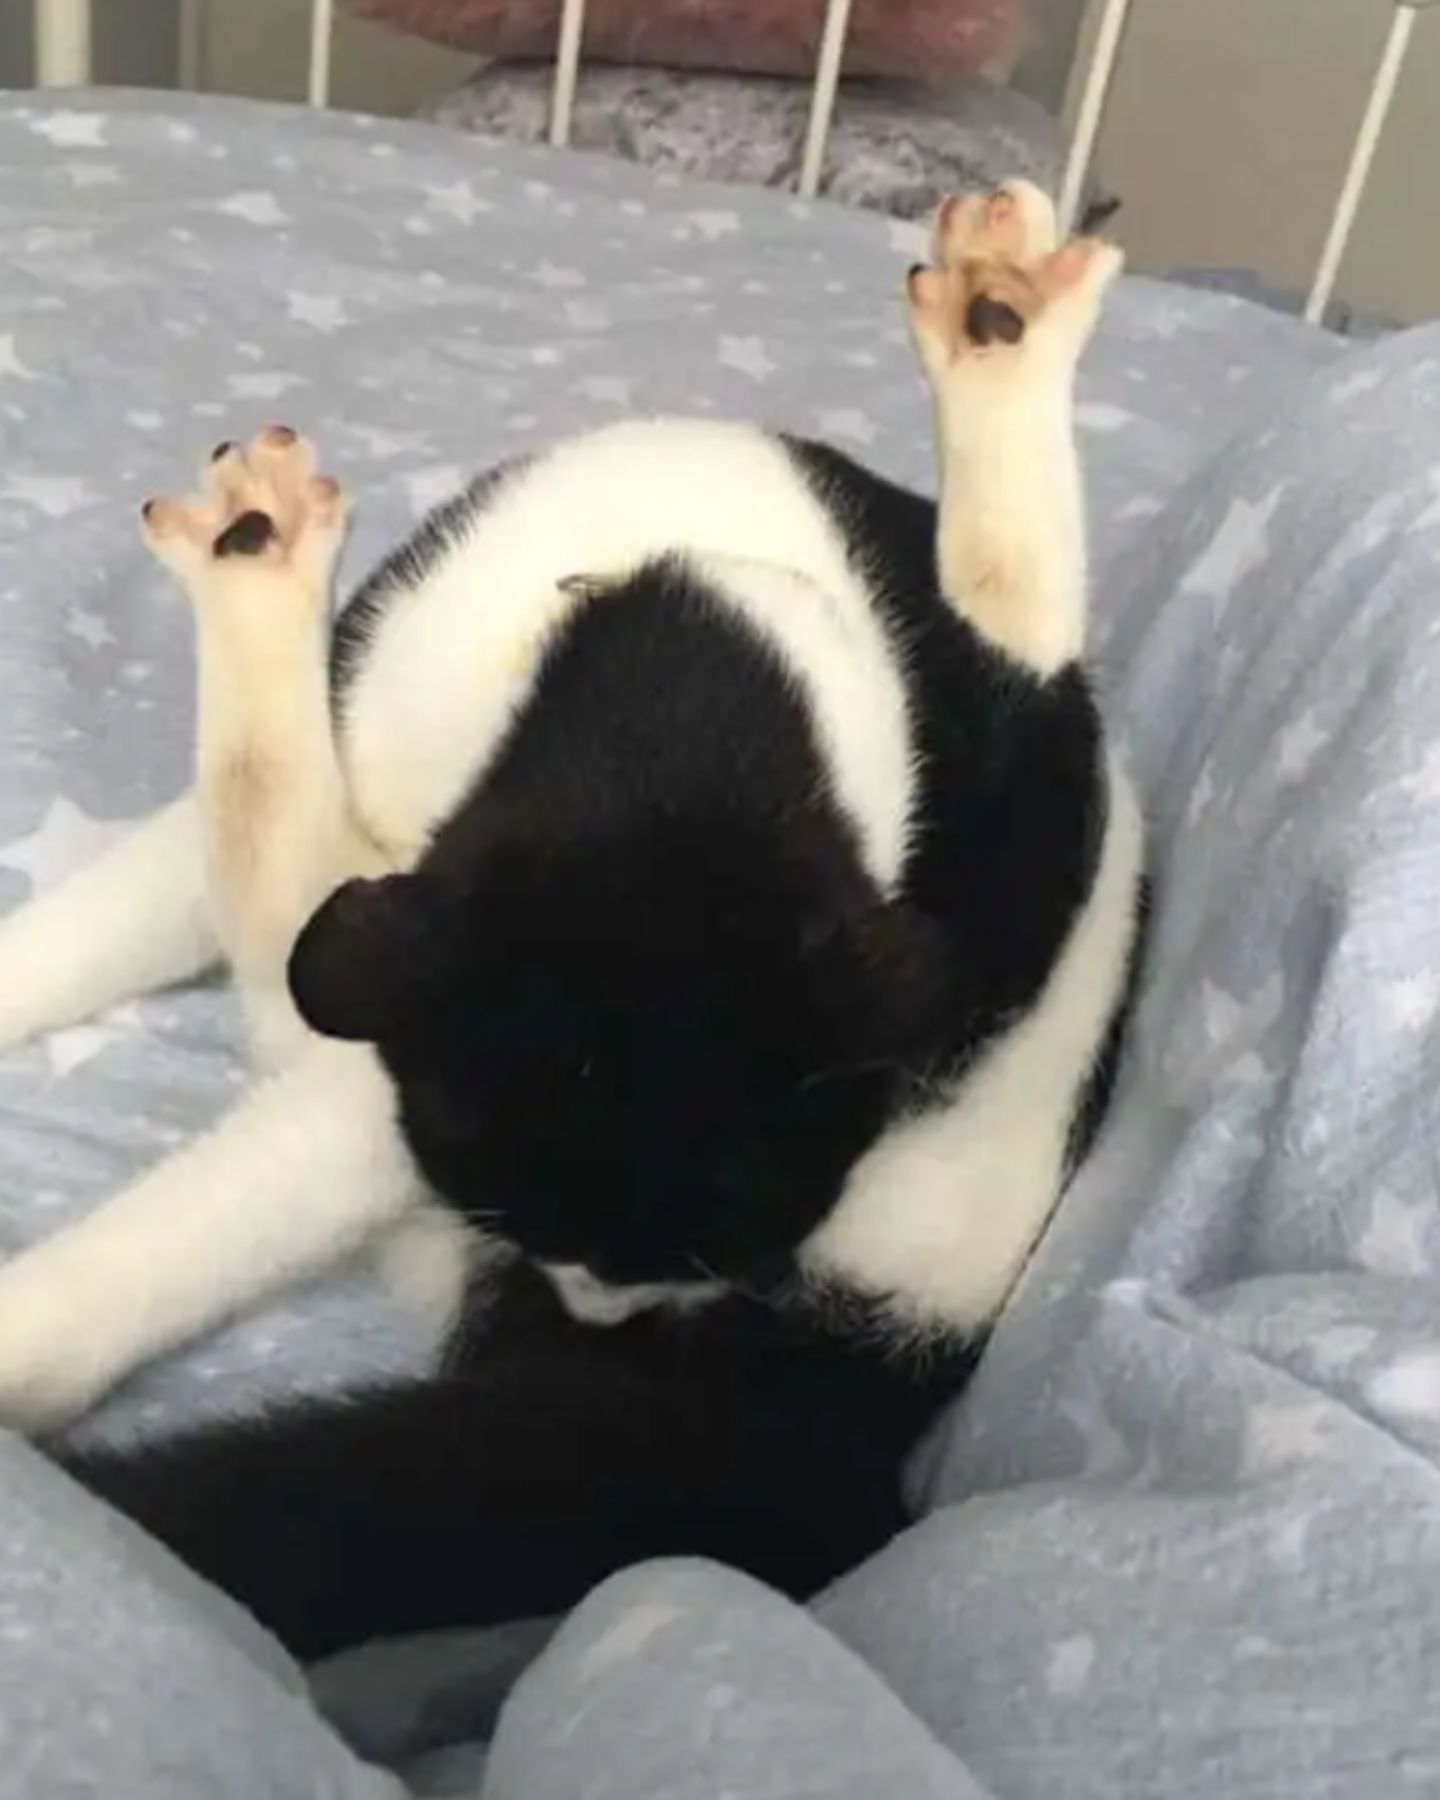 cat cleaning itself in bed